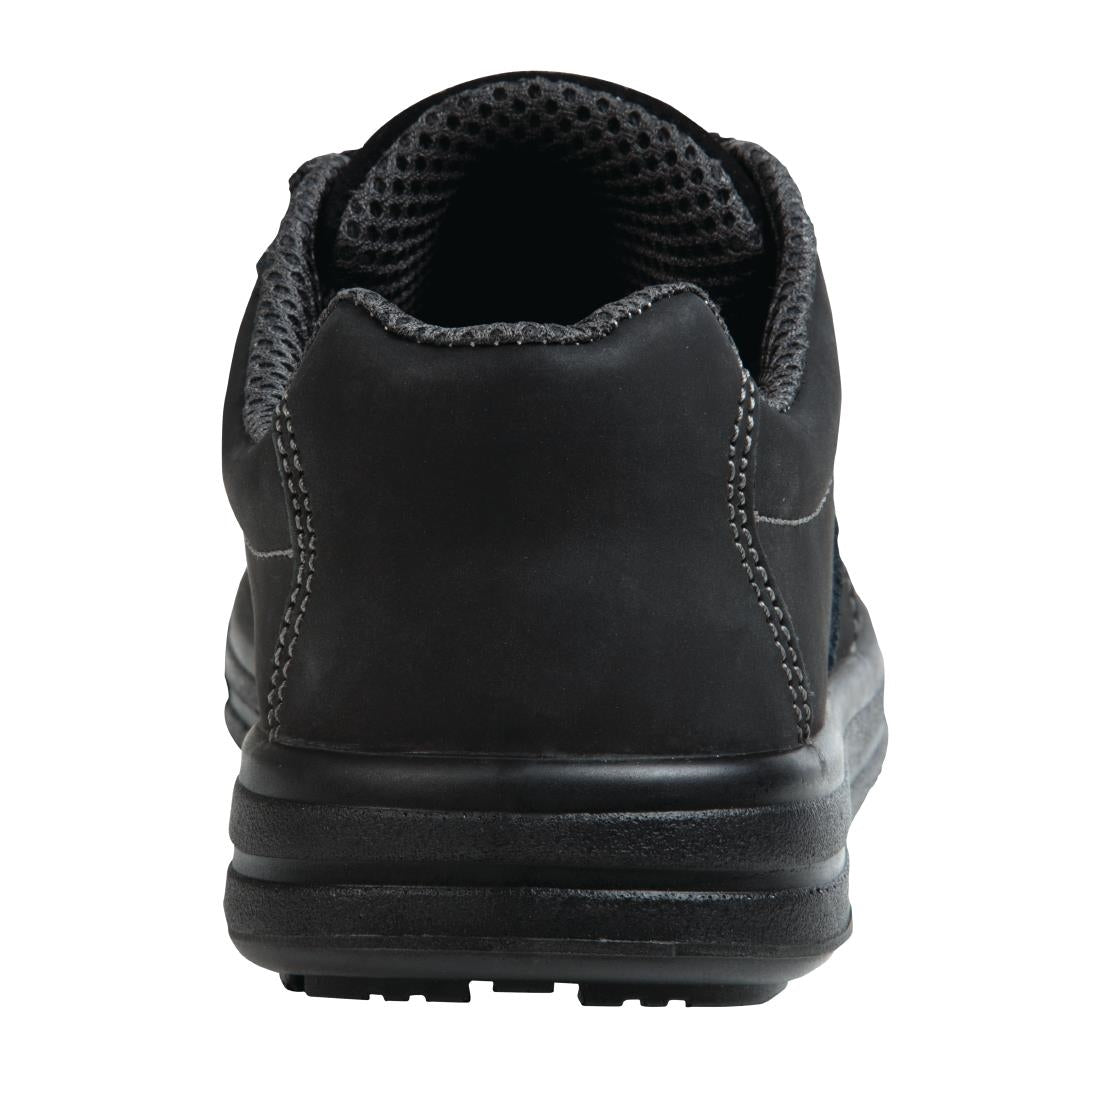 BB420-39 Slipbuster Safety Trainers Black 39